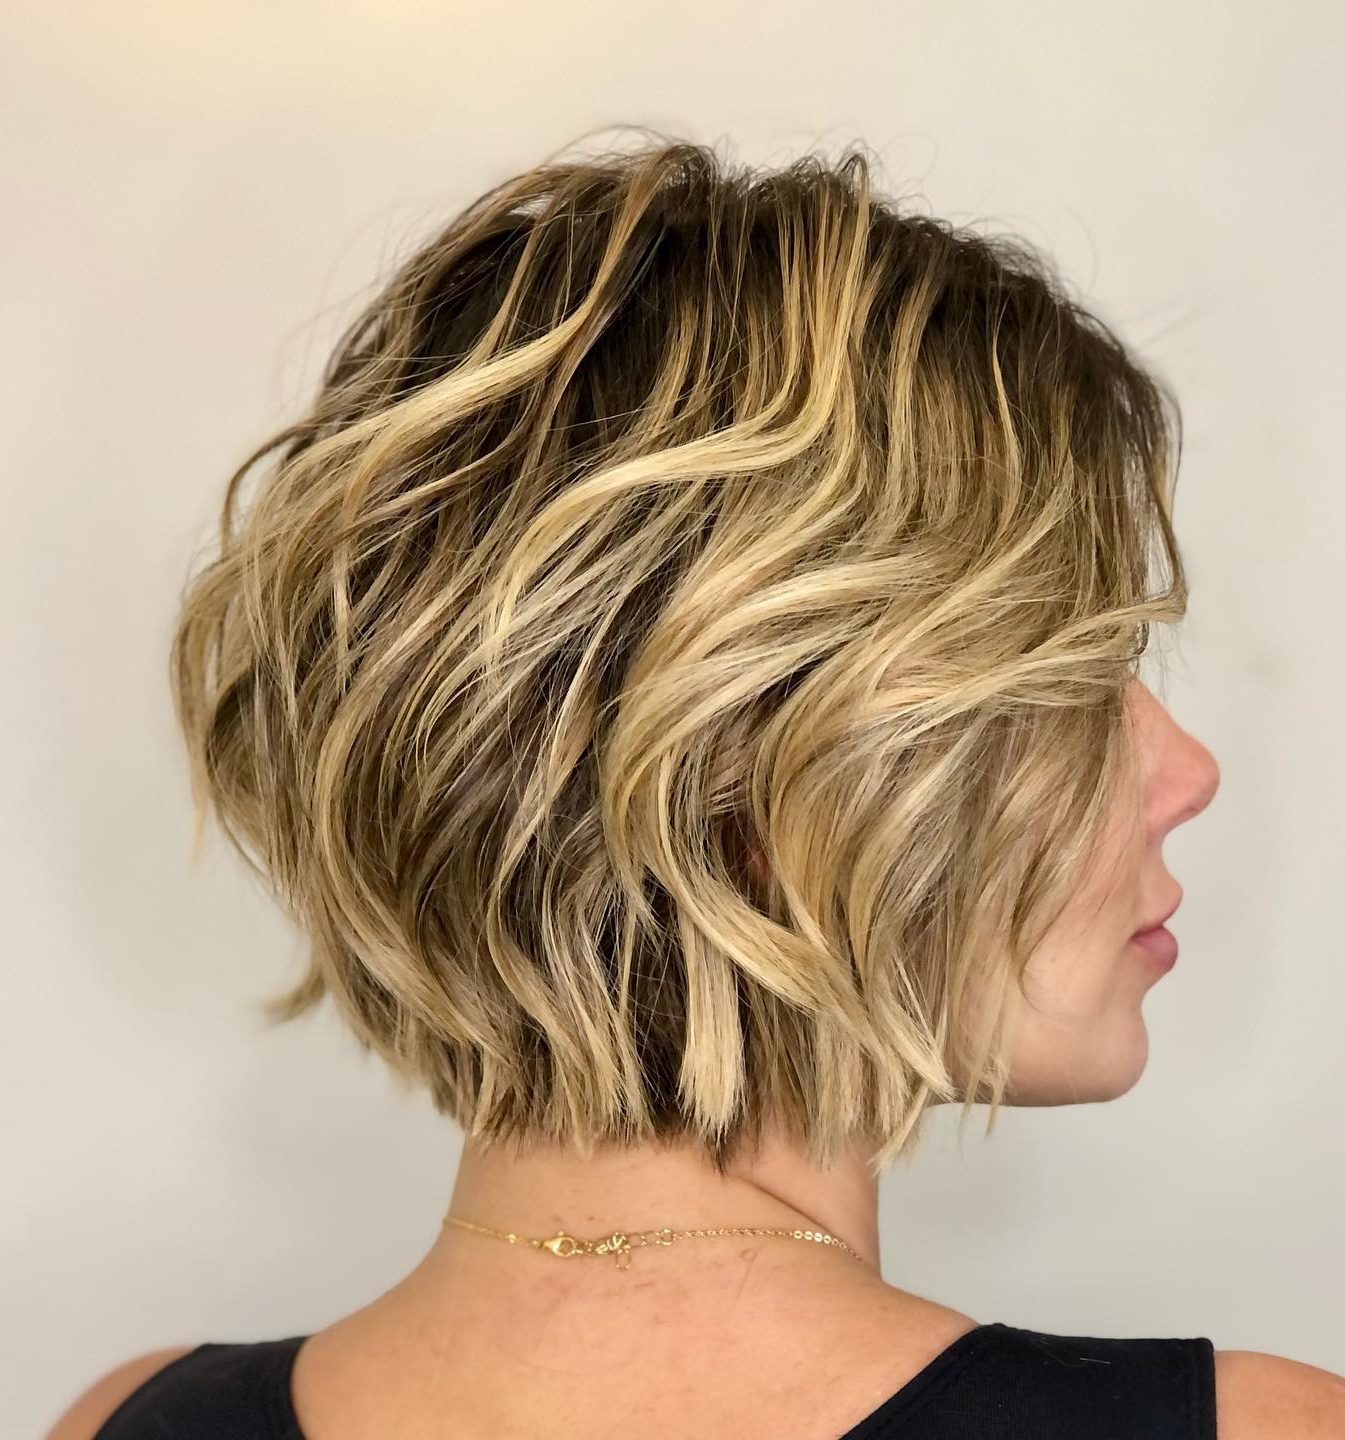 16 Perfect Short Hairstyles for Fine Hair - StylesRant